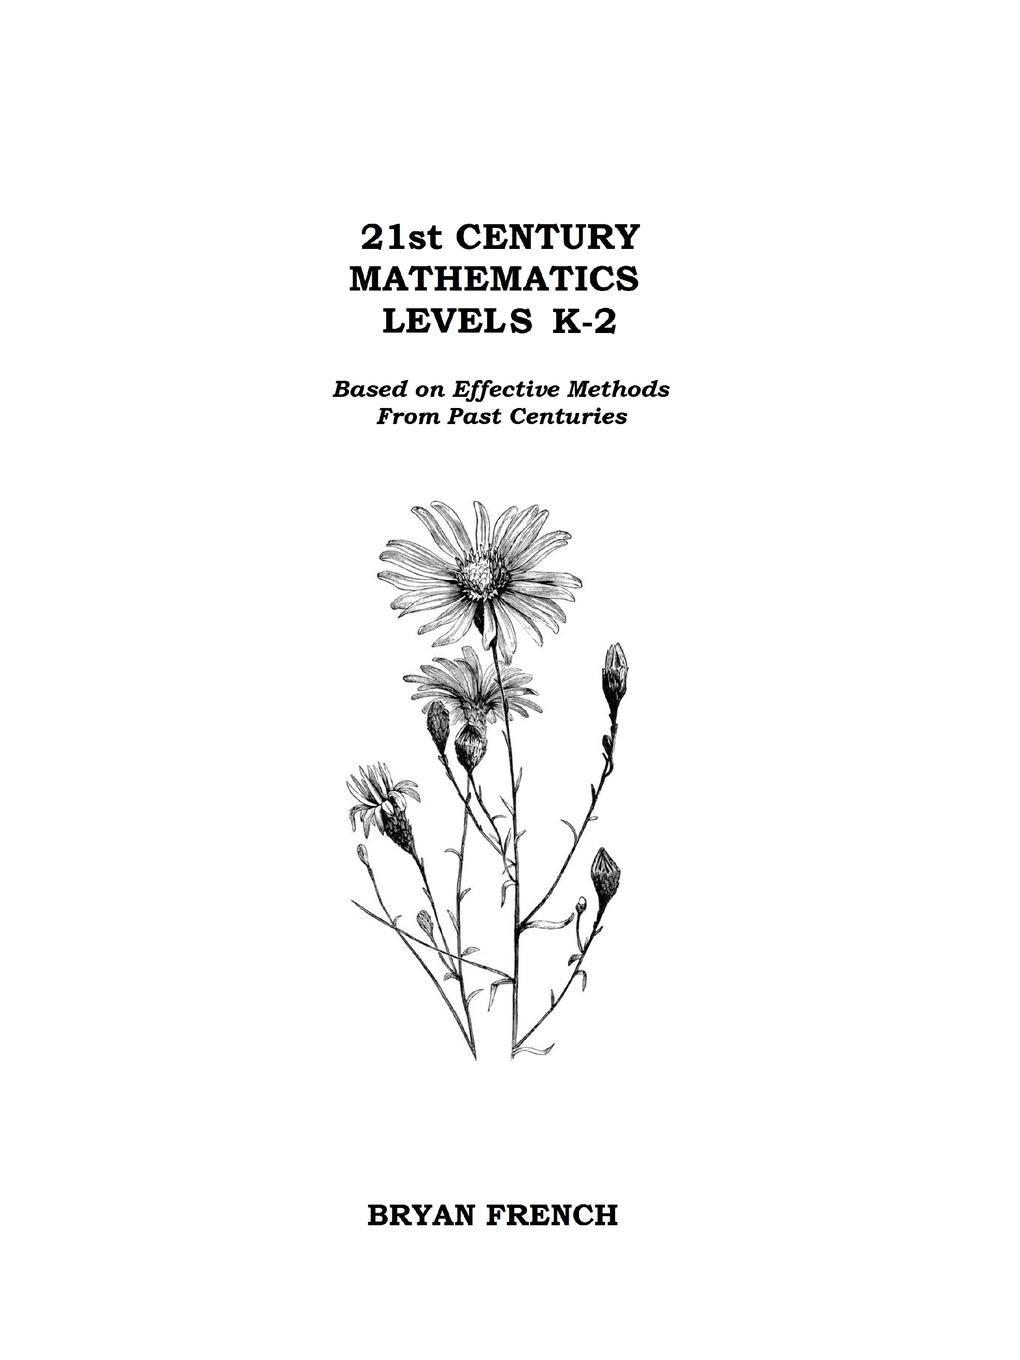 21st Century Mathematics Levels K - 2. Based on Effective Methods From Past Centuries